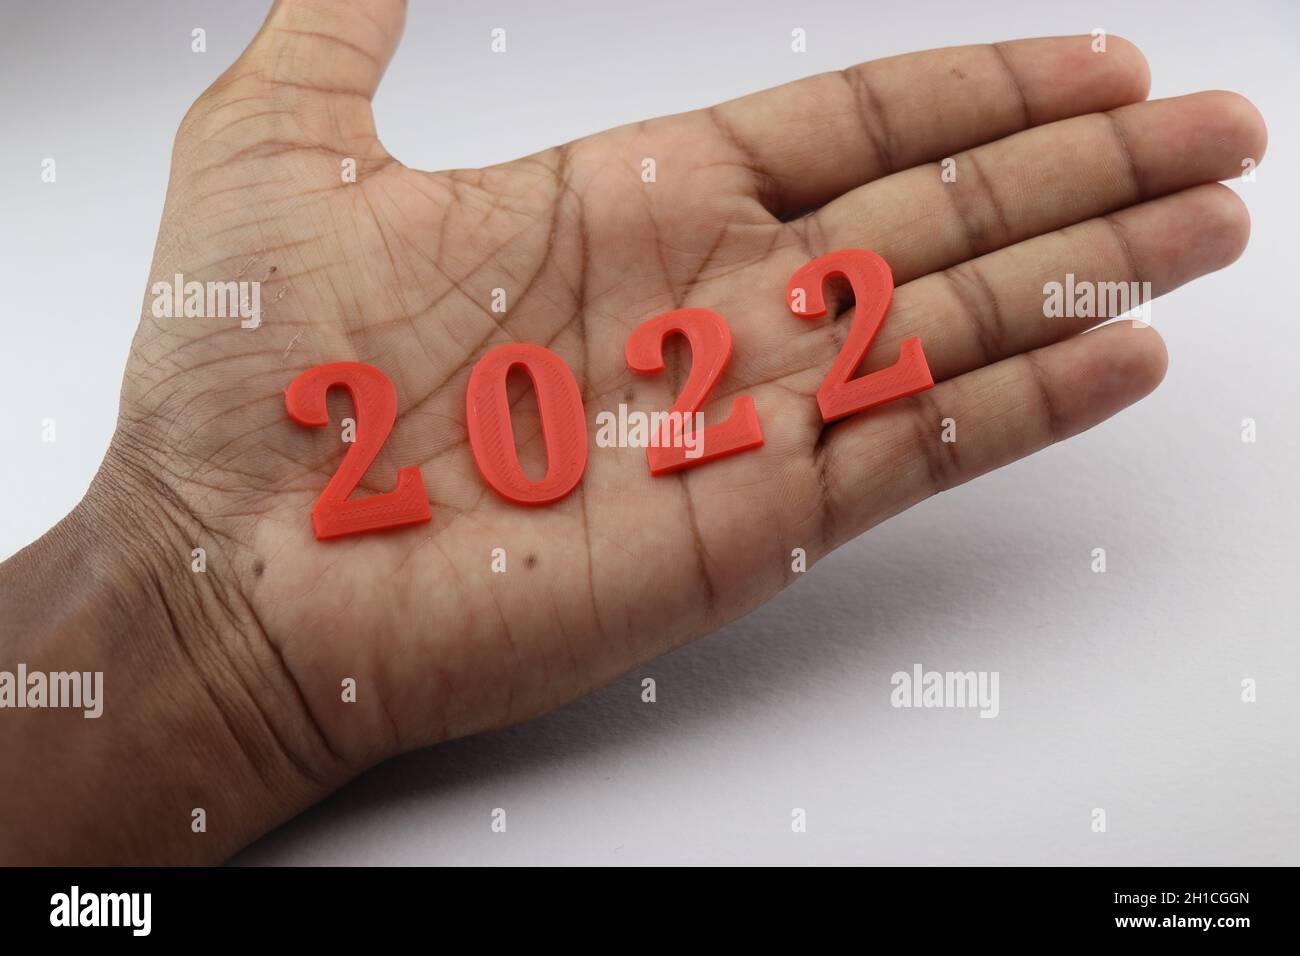 Happy new year wishes concept shown by holding 2022 in hand. A unique way of representing the new year 2022 Stock Photo